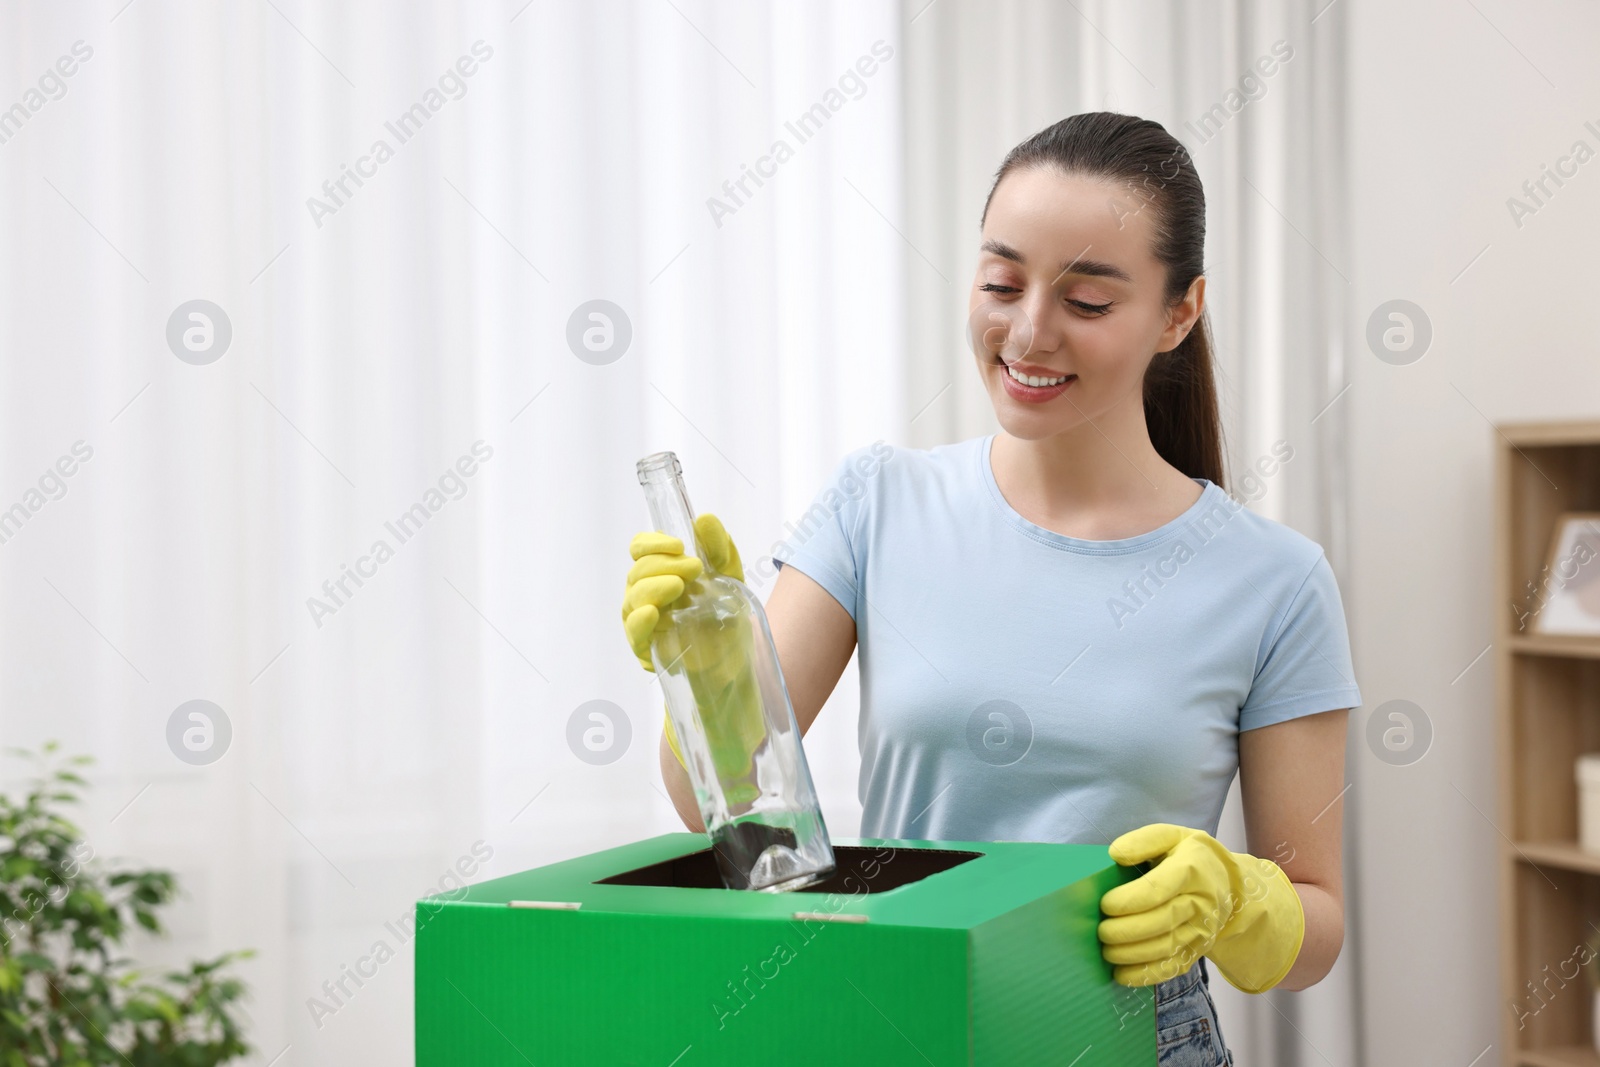 Photo of Garbage sorting. Smiling woman throwing glass bottle into cardboard box in room. Space for text